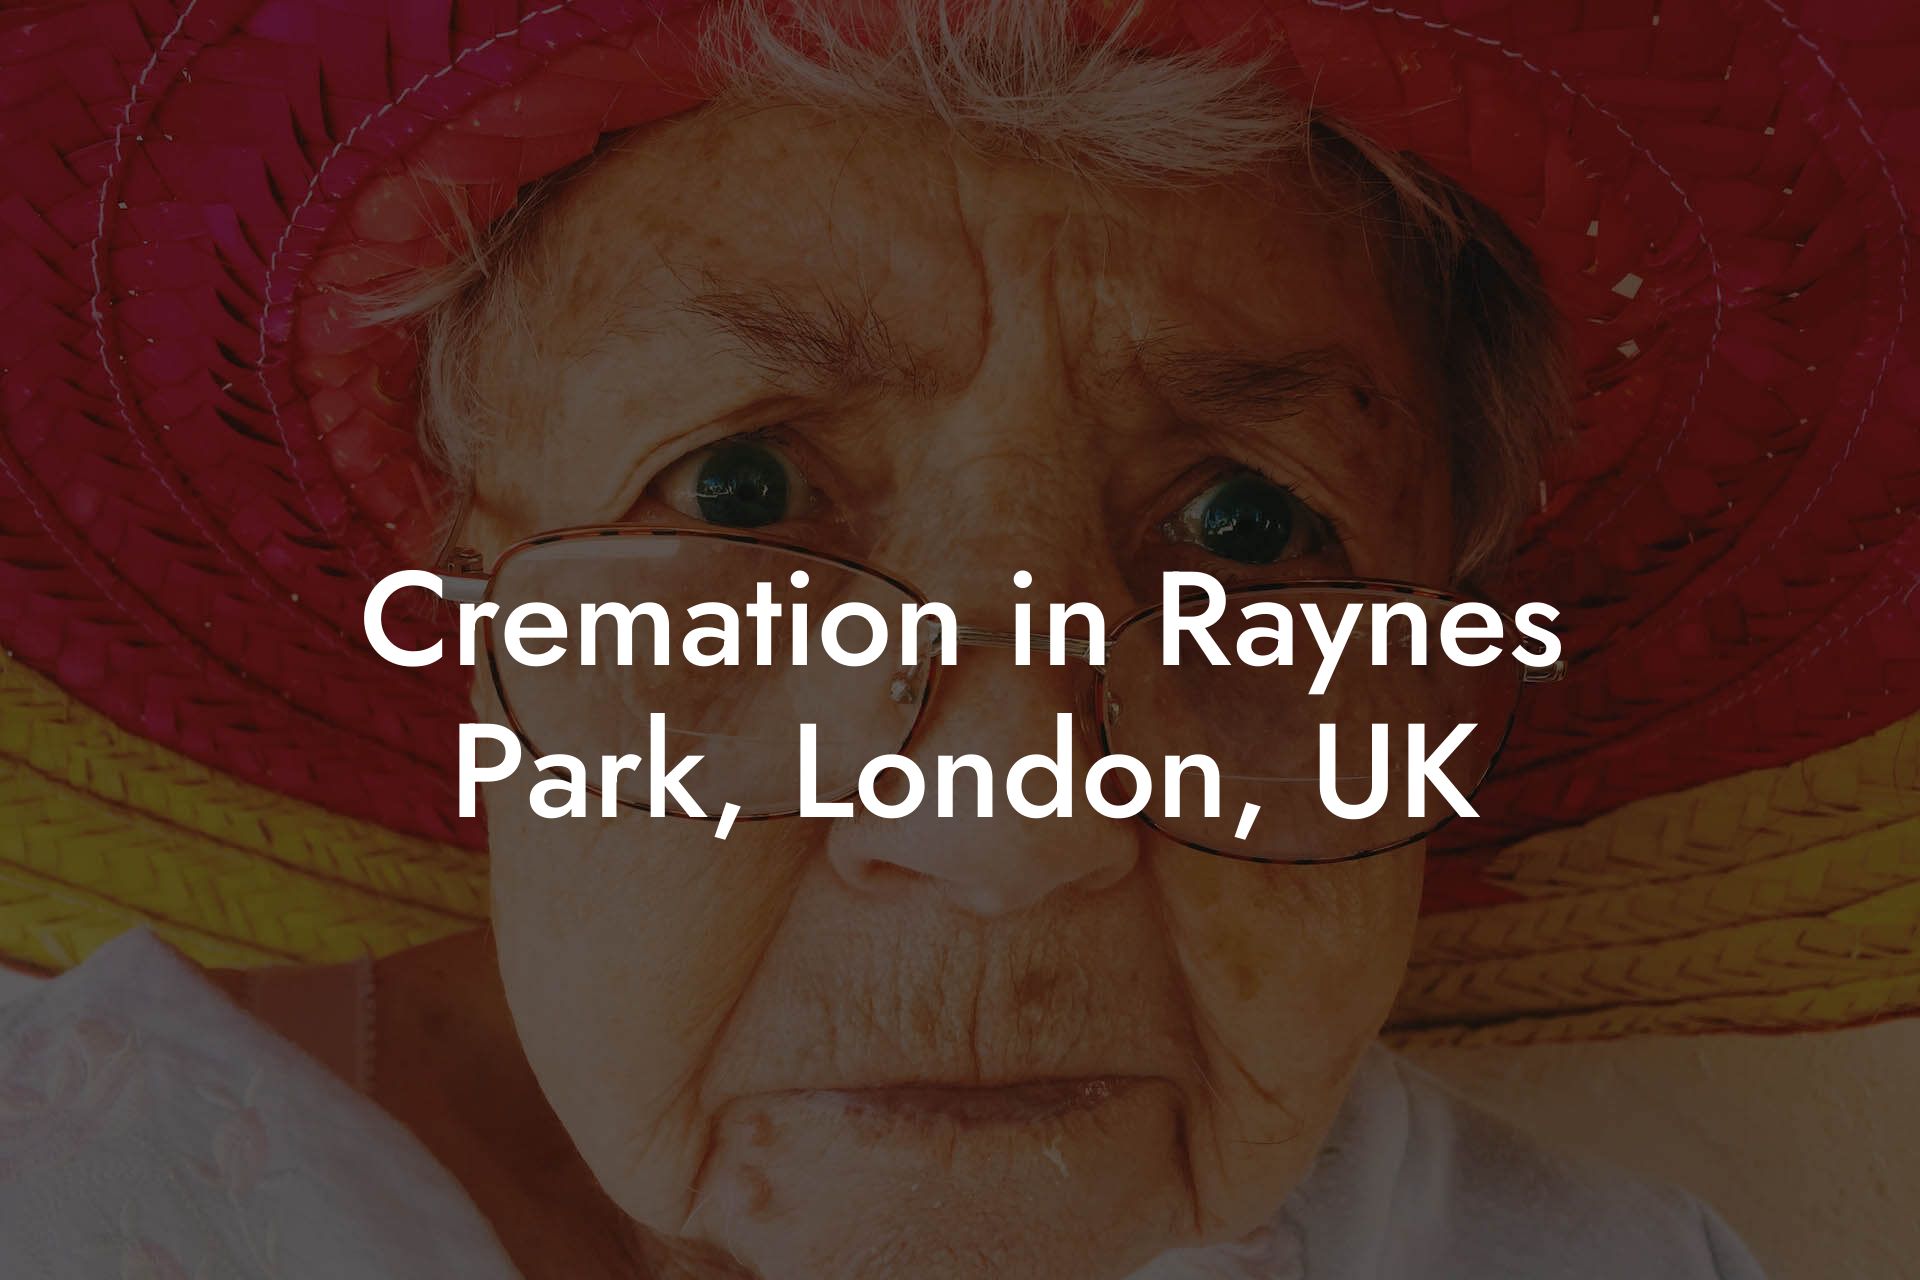 Cremation in Raynes Park, London, UK